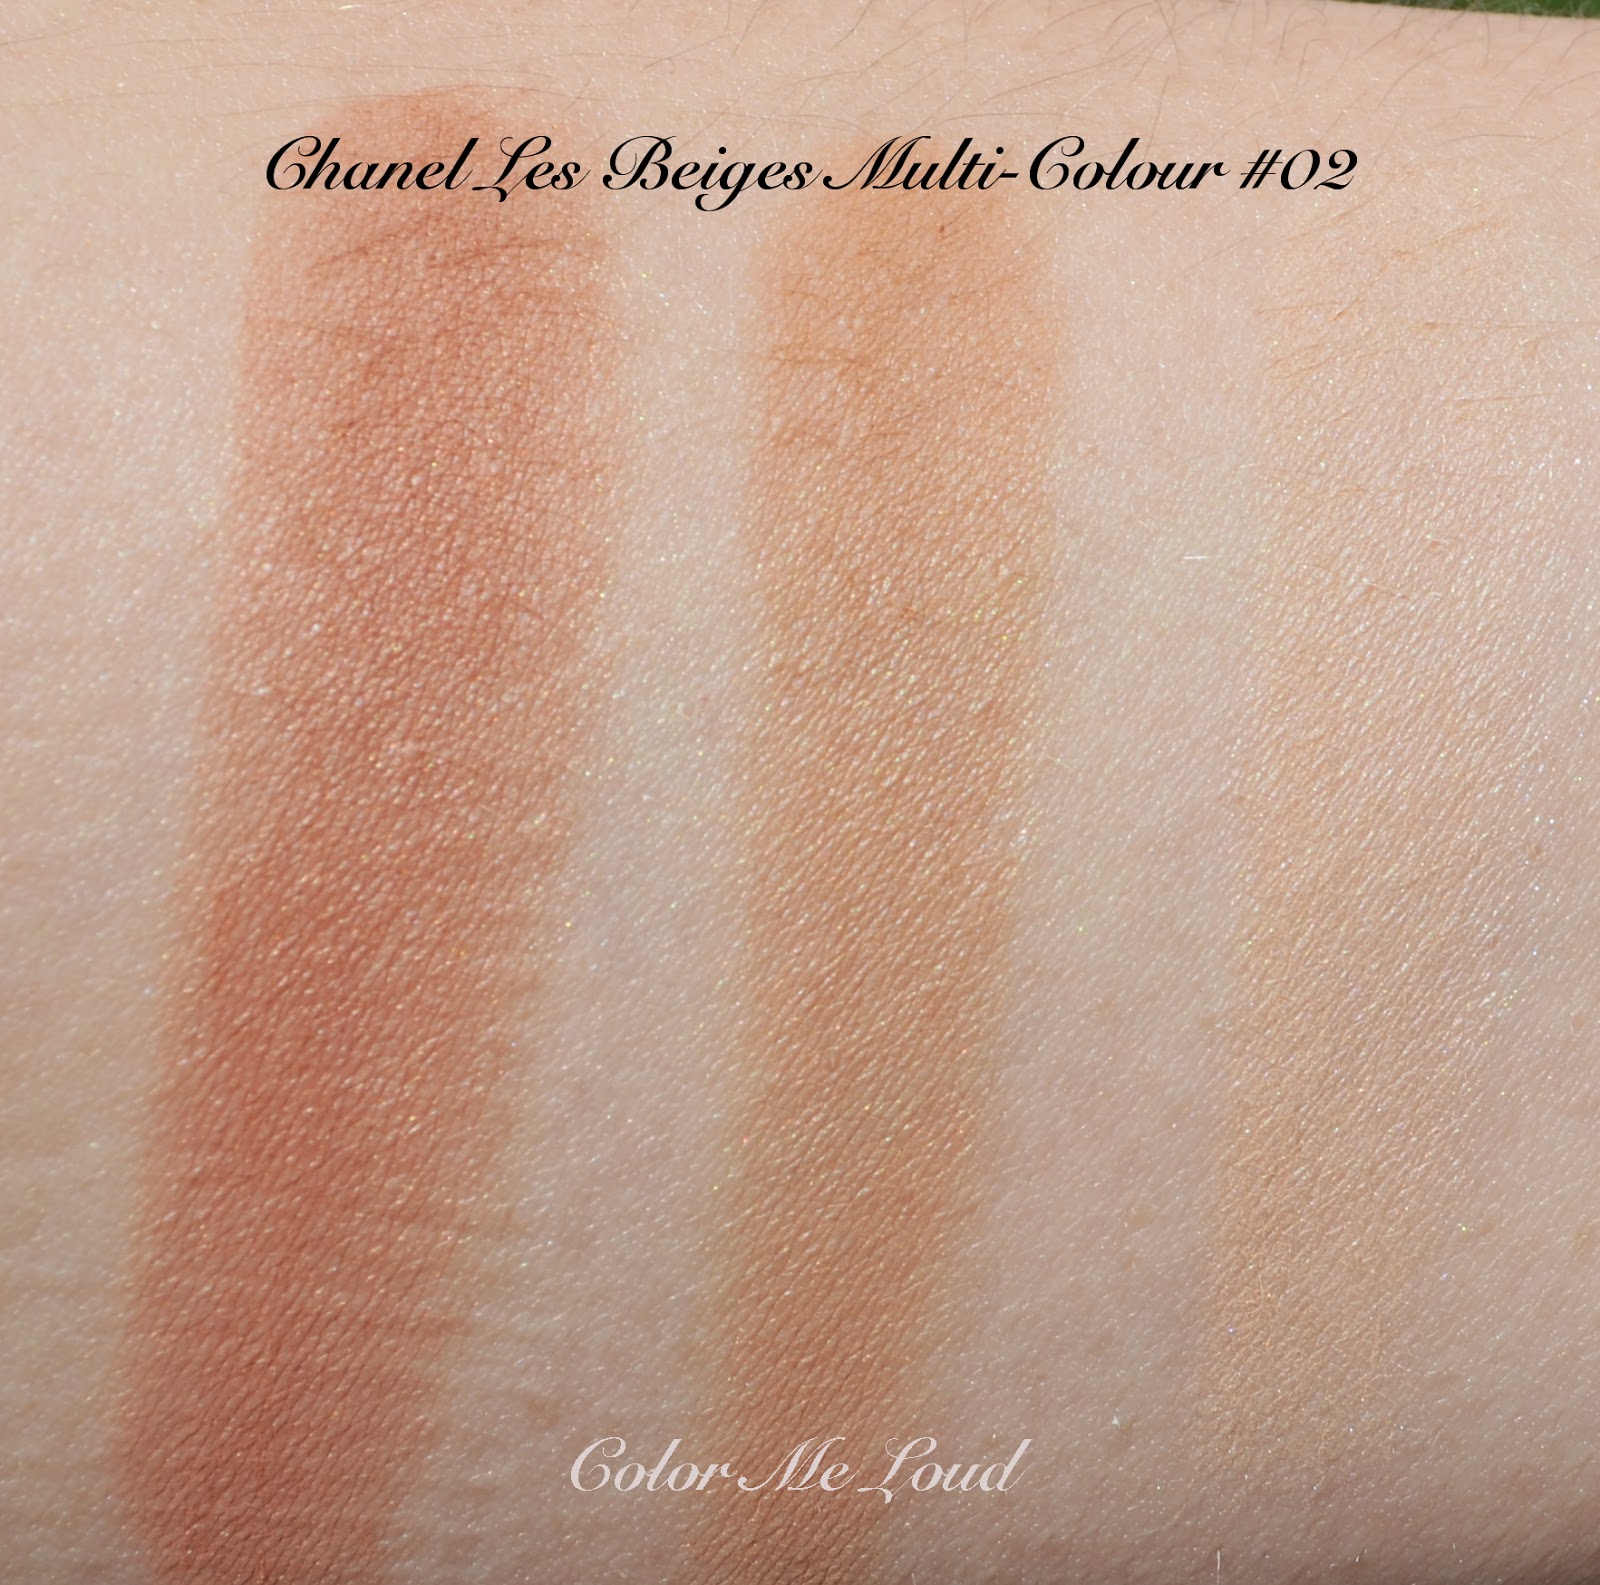 CHANEL Les Beiges Makeup Collection 2020 - Summer of Glow - Anita